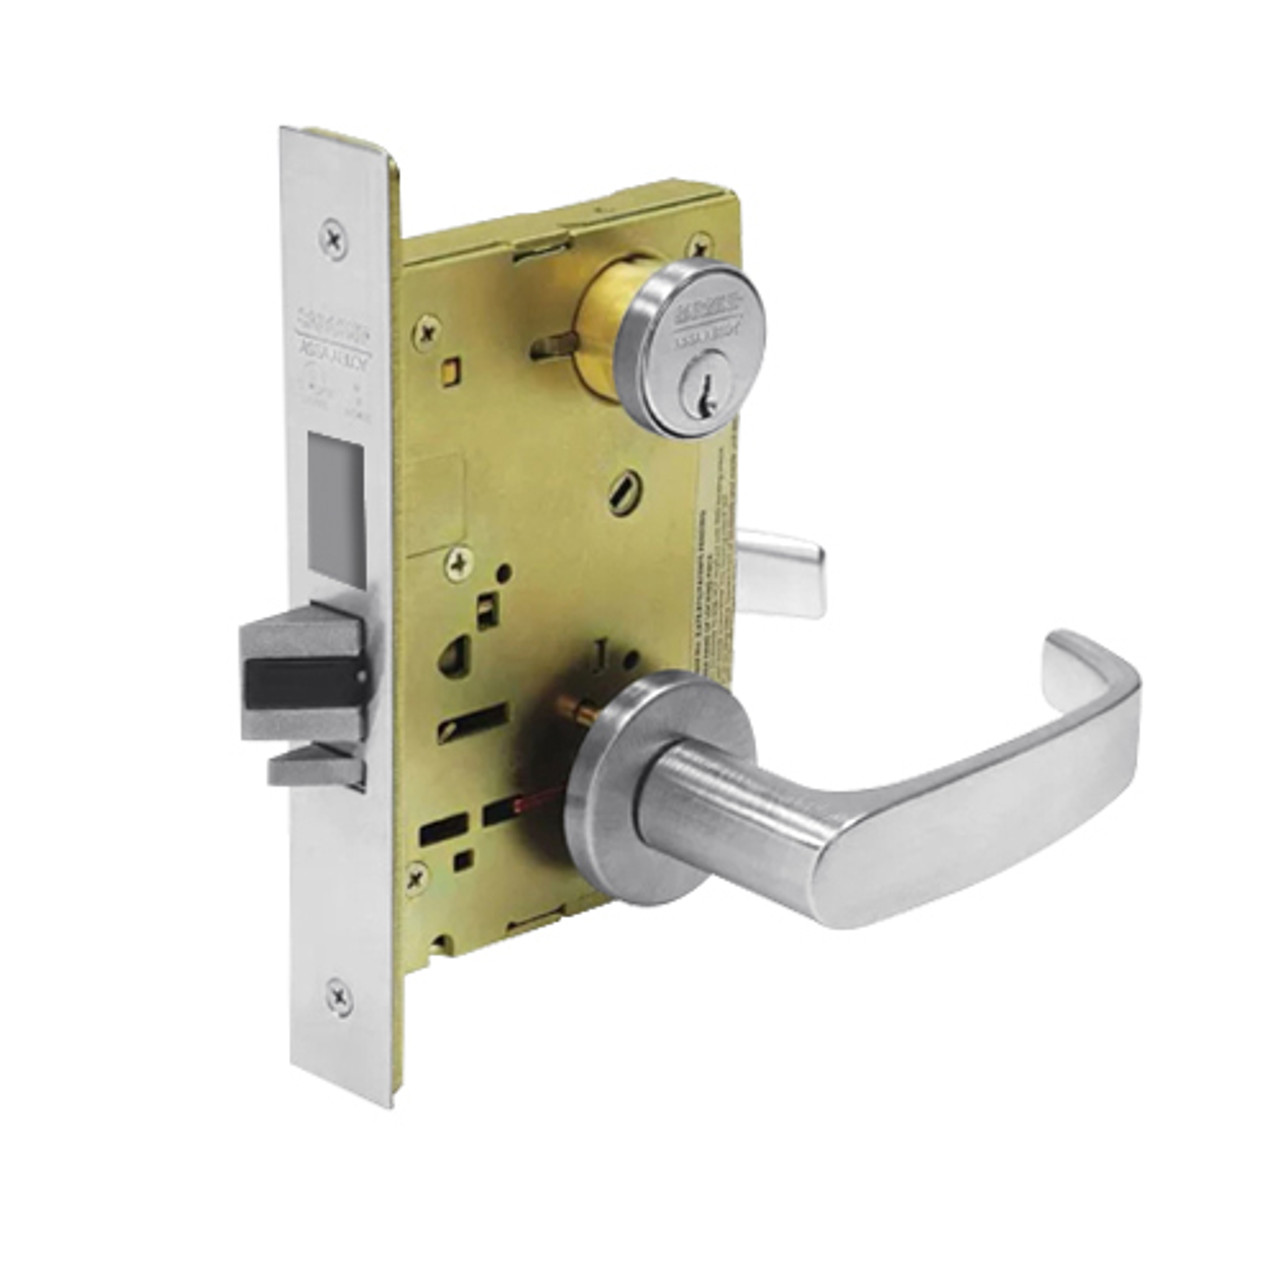 8248-LNL-26 Sargent 8200 Series Store Door Mortise Lock with LNL Lever Trim in Bright Chrome